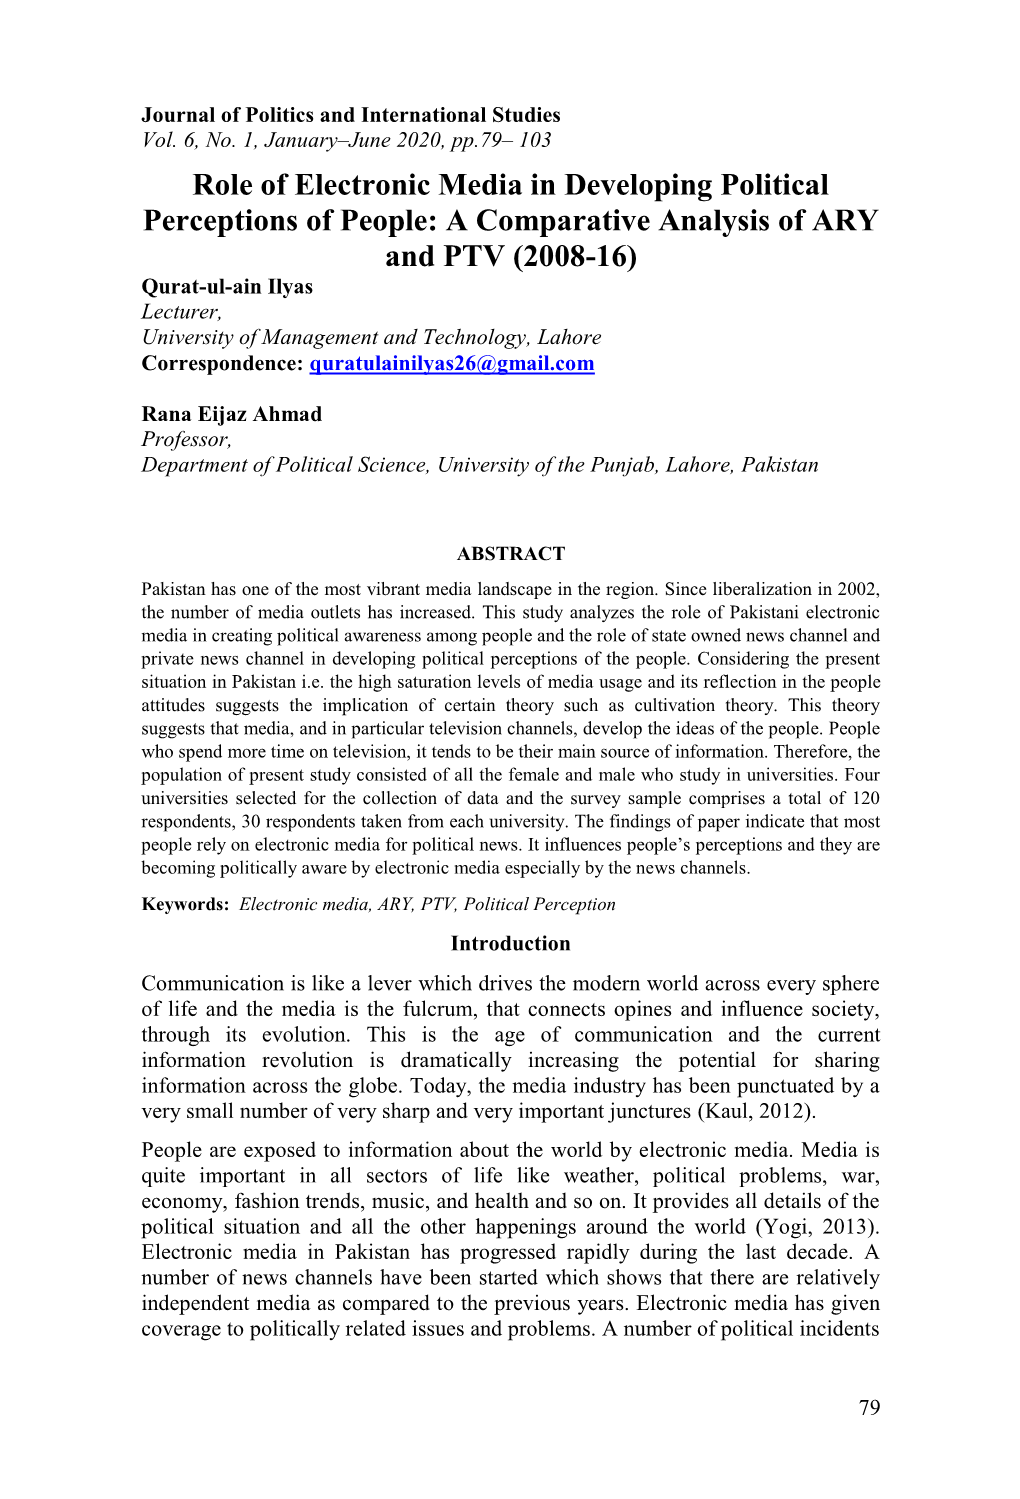 A Comparative Analysis of ARY and PTV (2008-16)